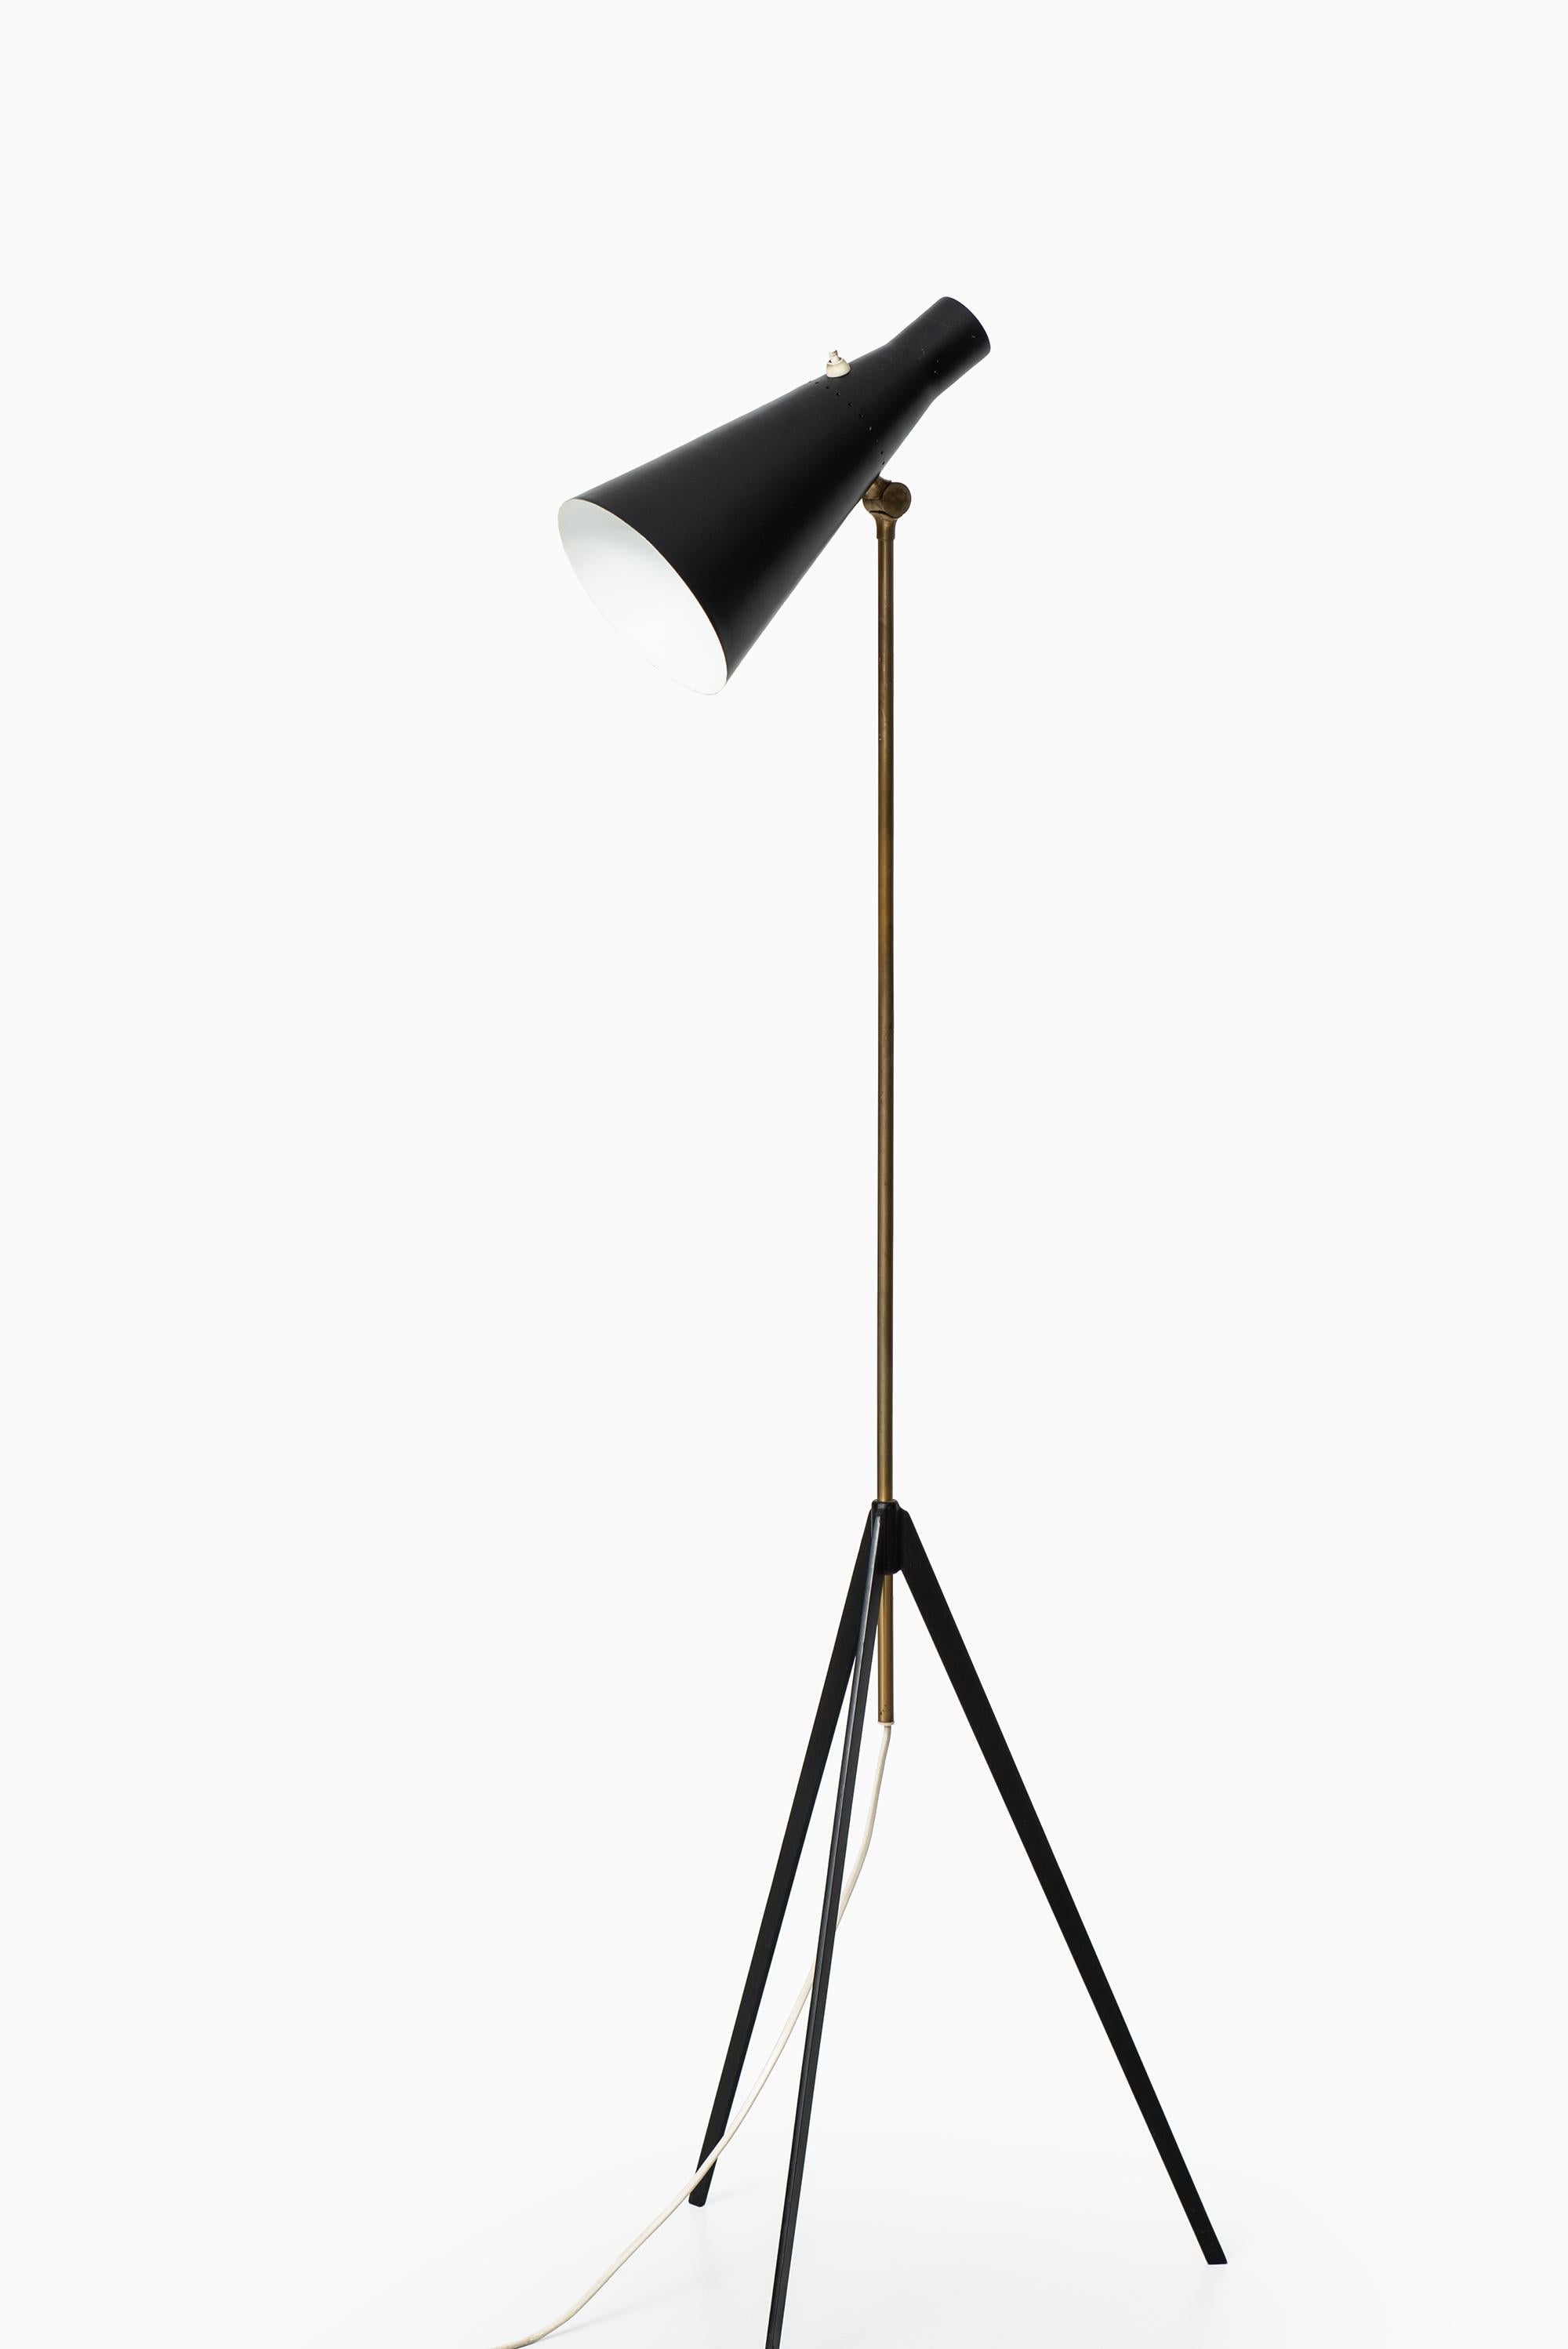 Mid-20th Century Alf Svensson Floor Lamp Model G-36 Produced by Bergbom in Sweden For Sale